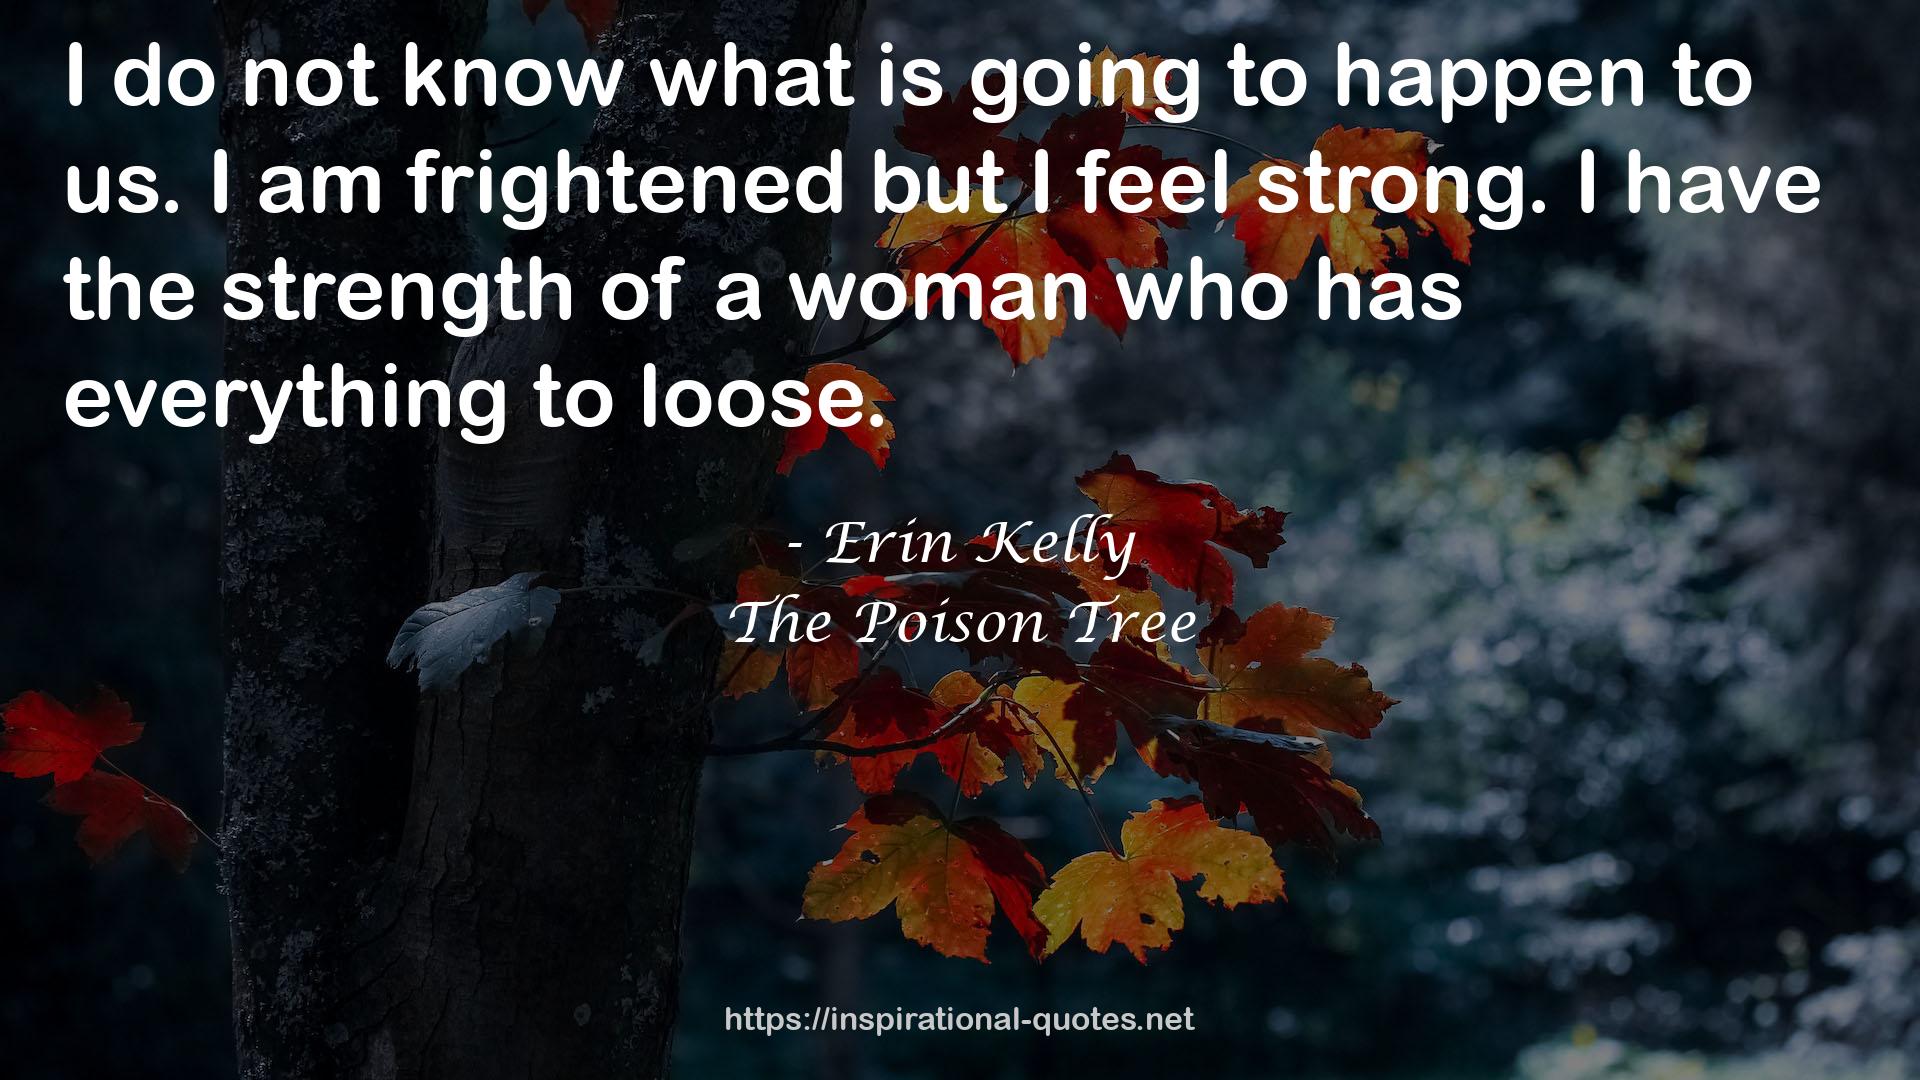 Erin Kelly QUOTES